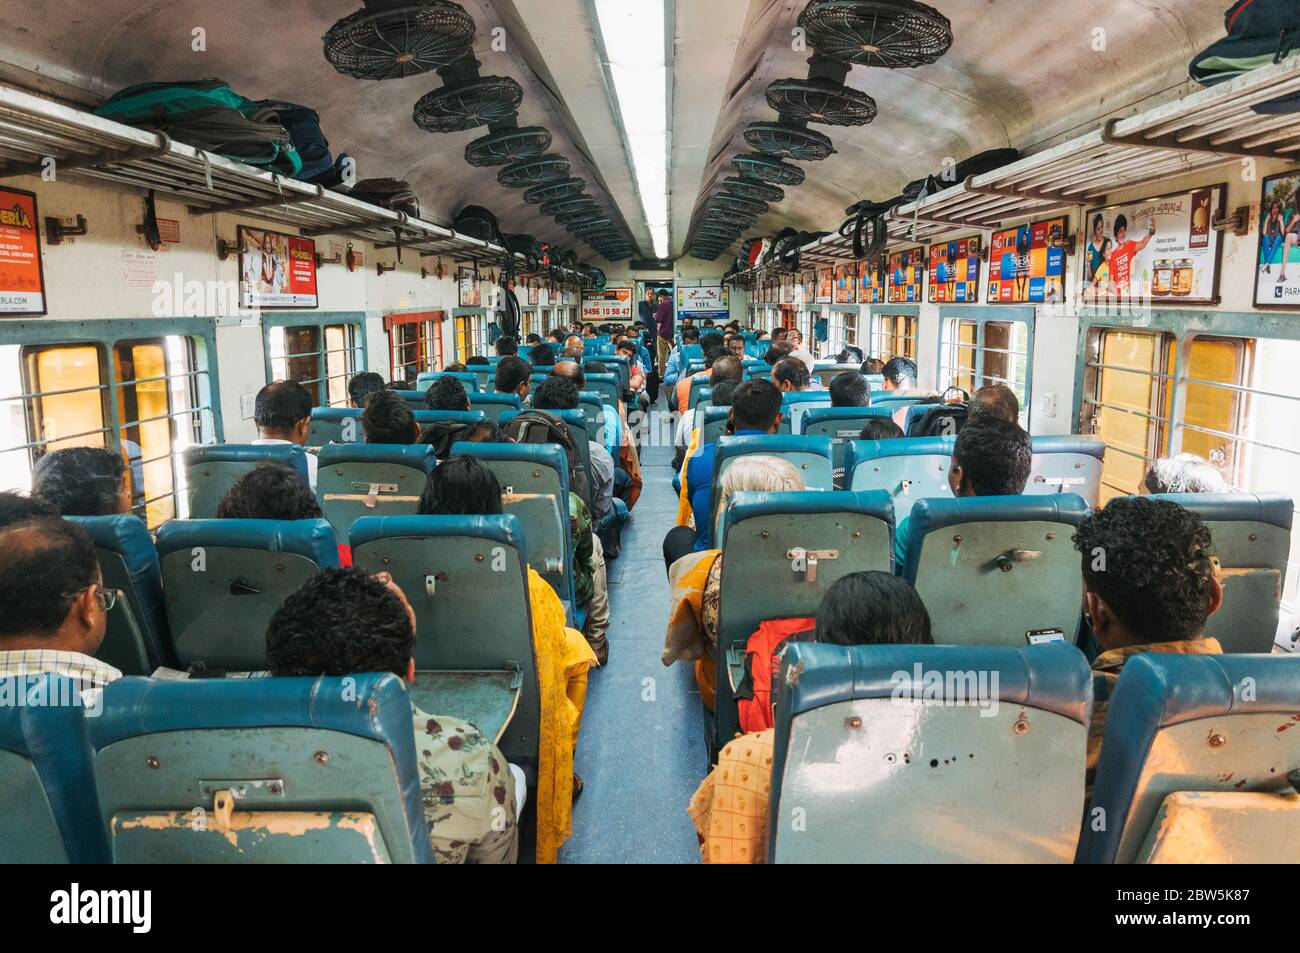 The cabin full of Indian commuters aboard a train in Kerala, India Stock Photo